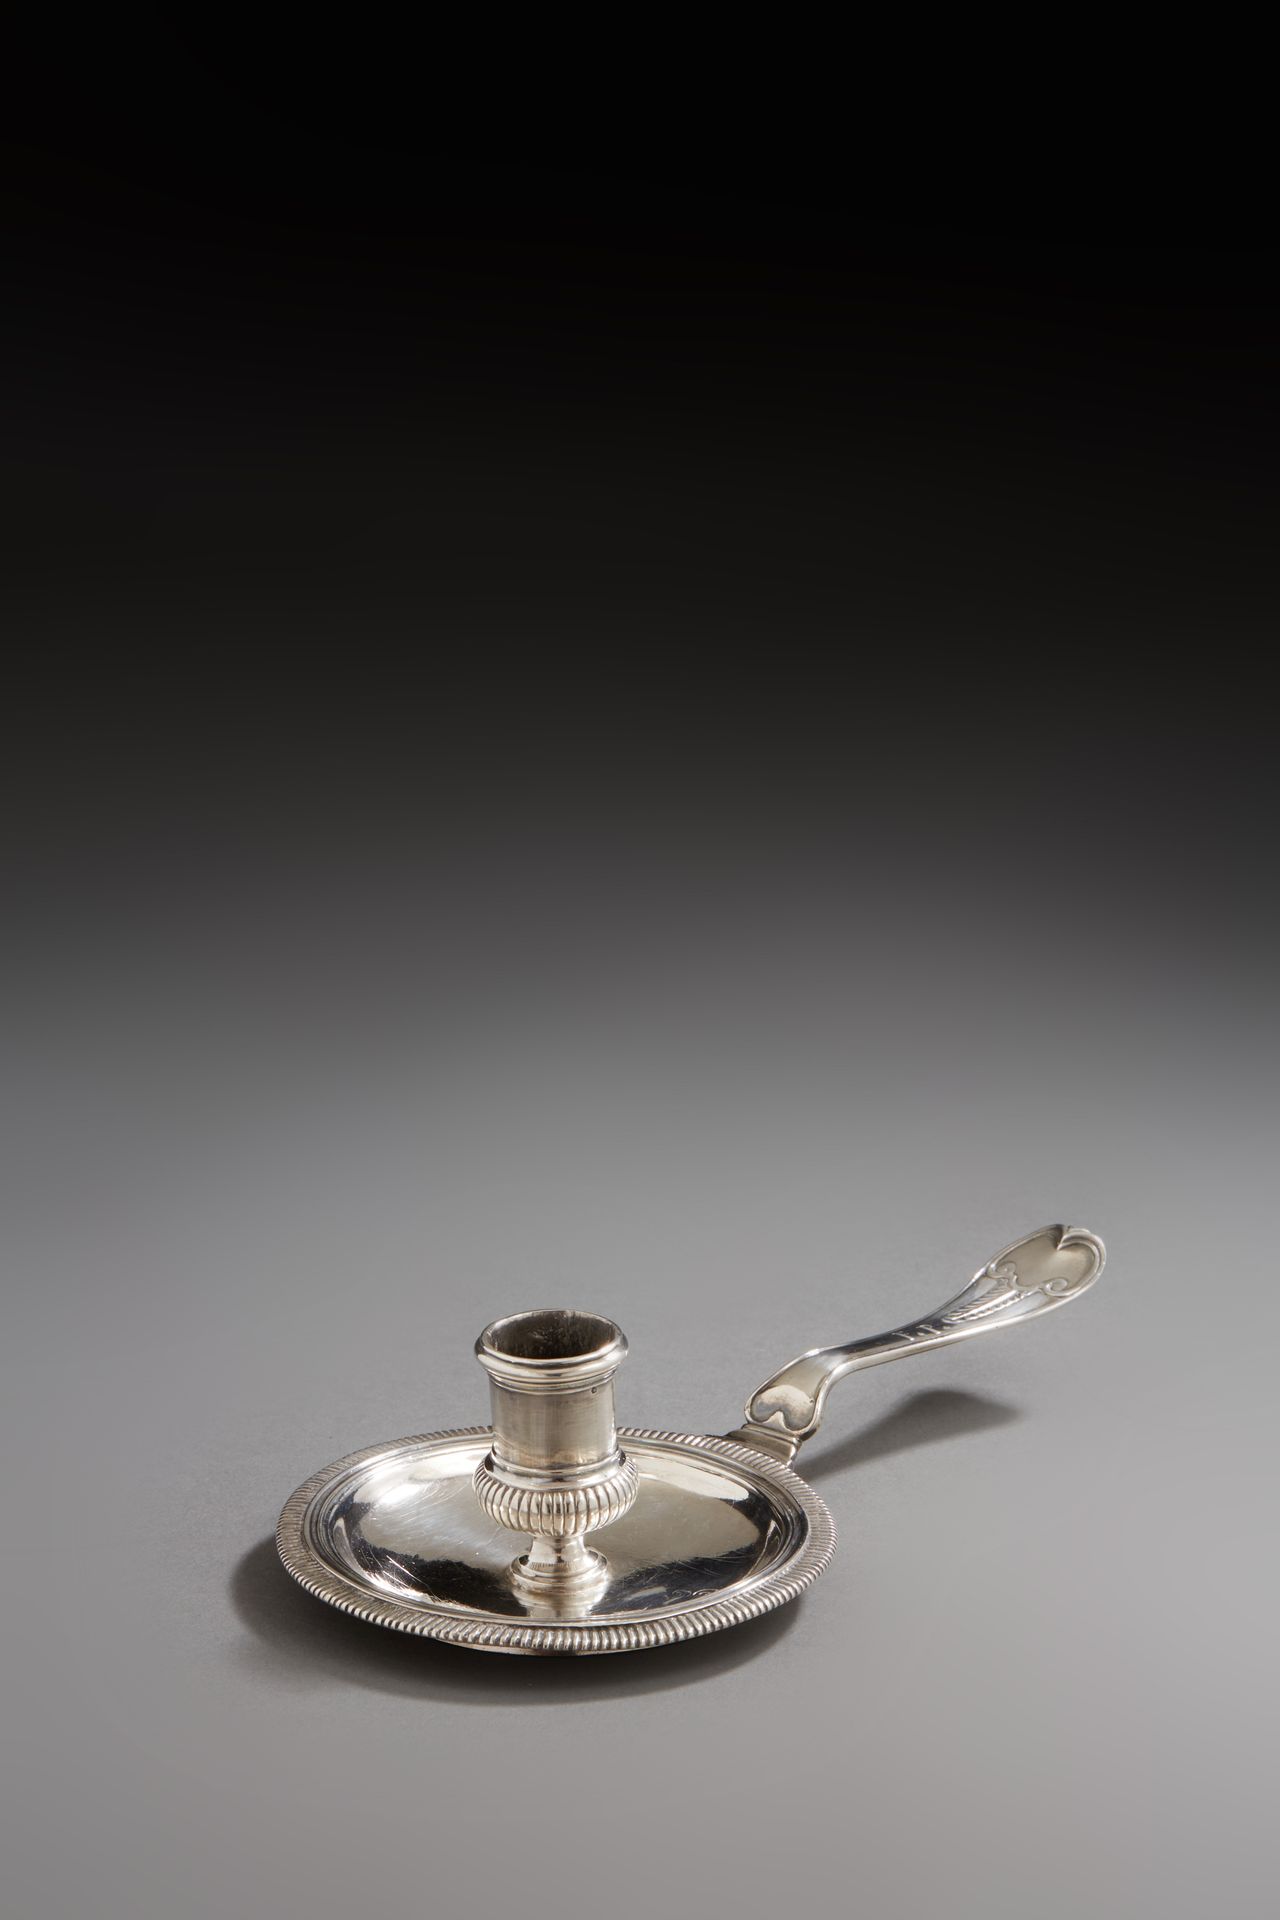 Null PROVINCE FIRST QUARTER OF THE 18th CENTURY
Silver hand candlestick, the cir&hellip;